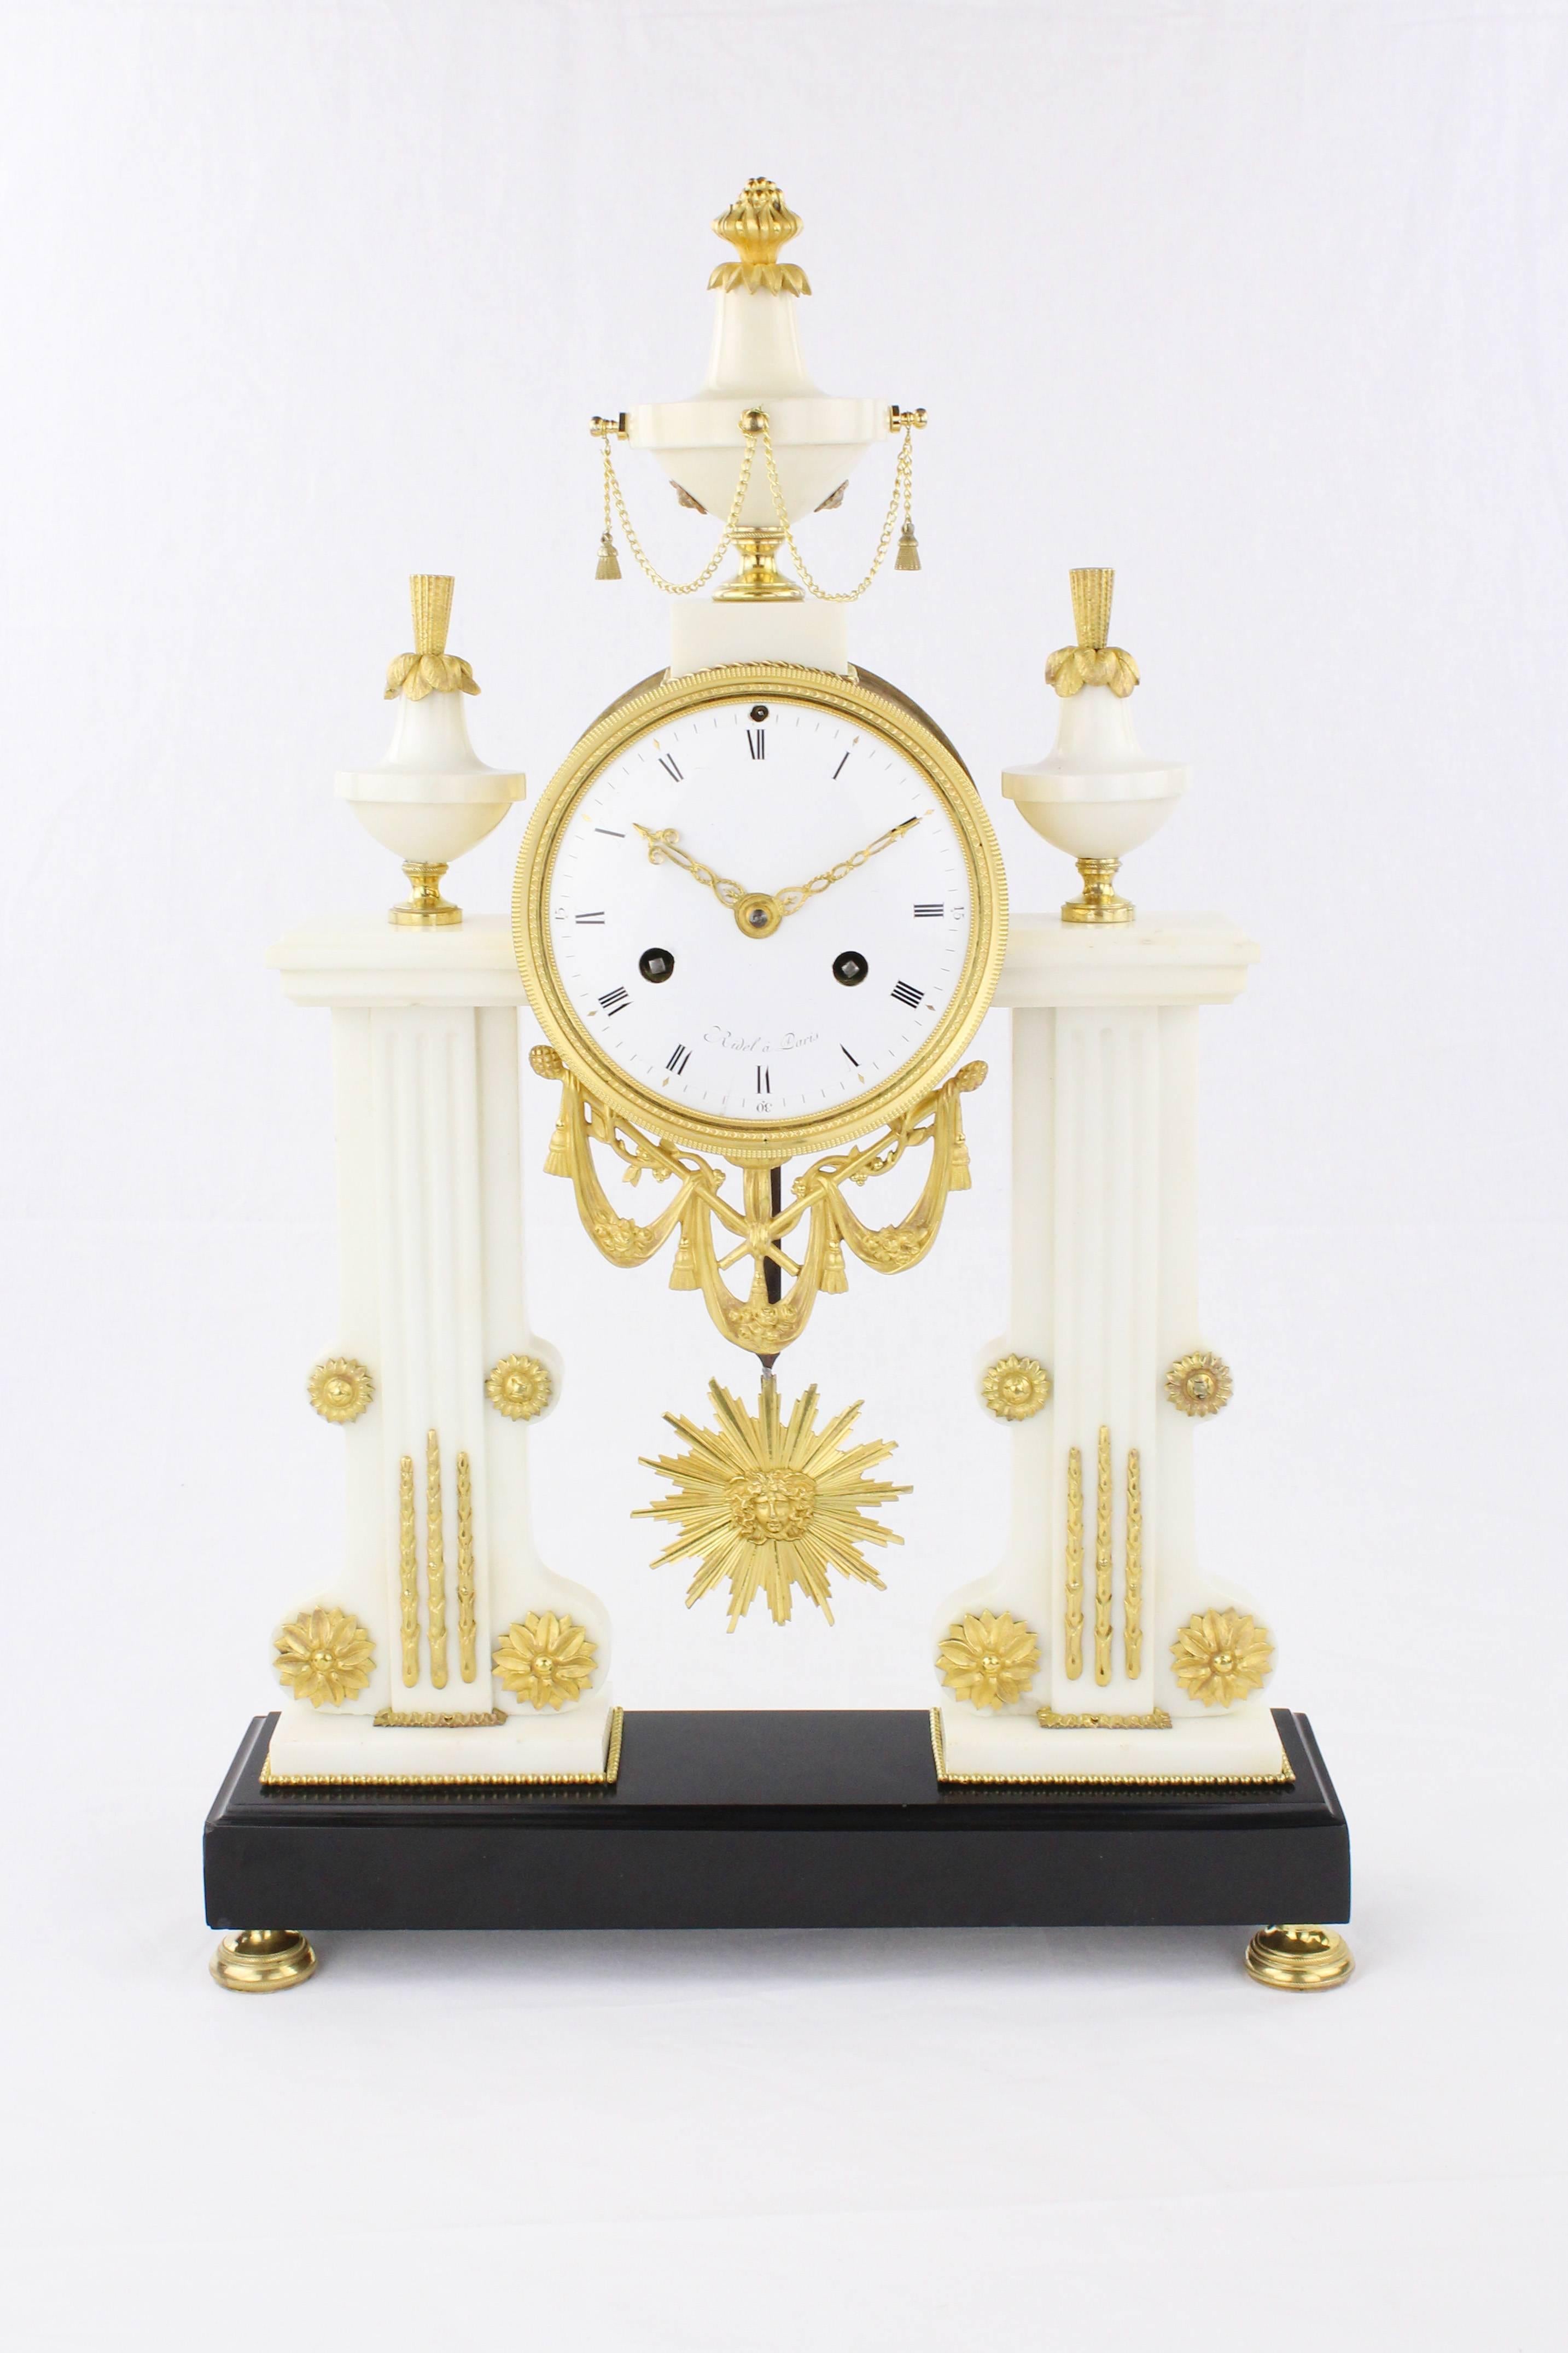 French early 19th century clock, circa 1810.
Weekly runner.
Nice solar pendulum.
Stroke of the clock to half and by the full hour.
"Main entrance“ of white marble.
Fire-gilt metal fittings.
Black stone base.
Measures: Height 52 cm, width